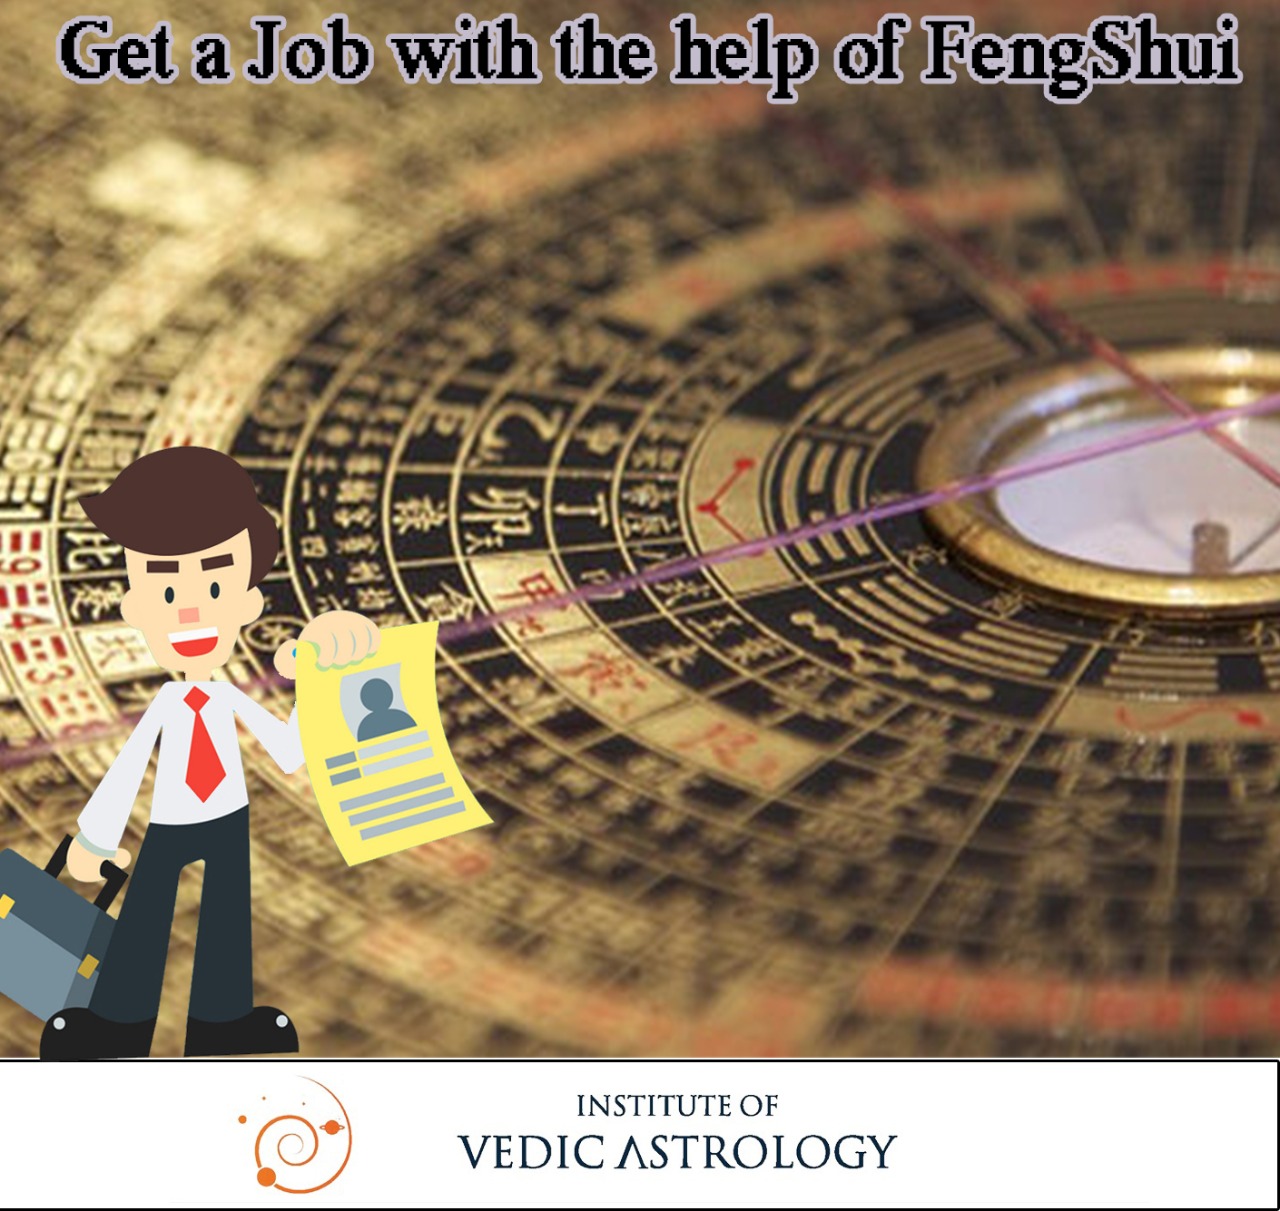 Get a Job with the Help of Feng Shui